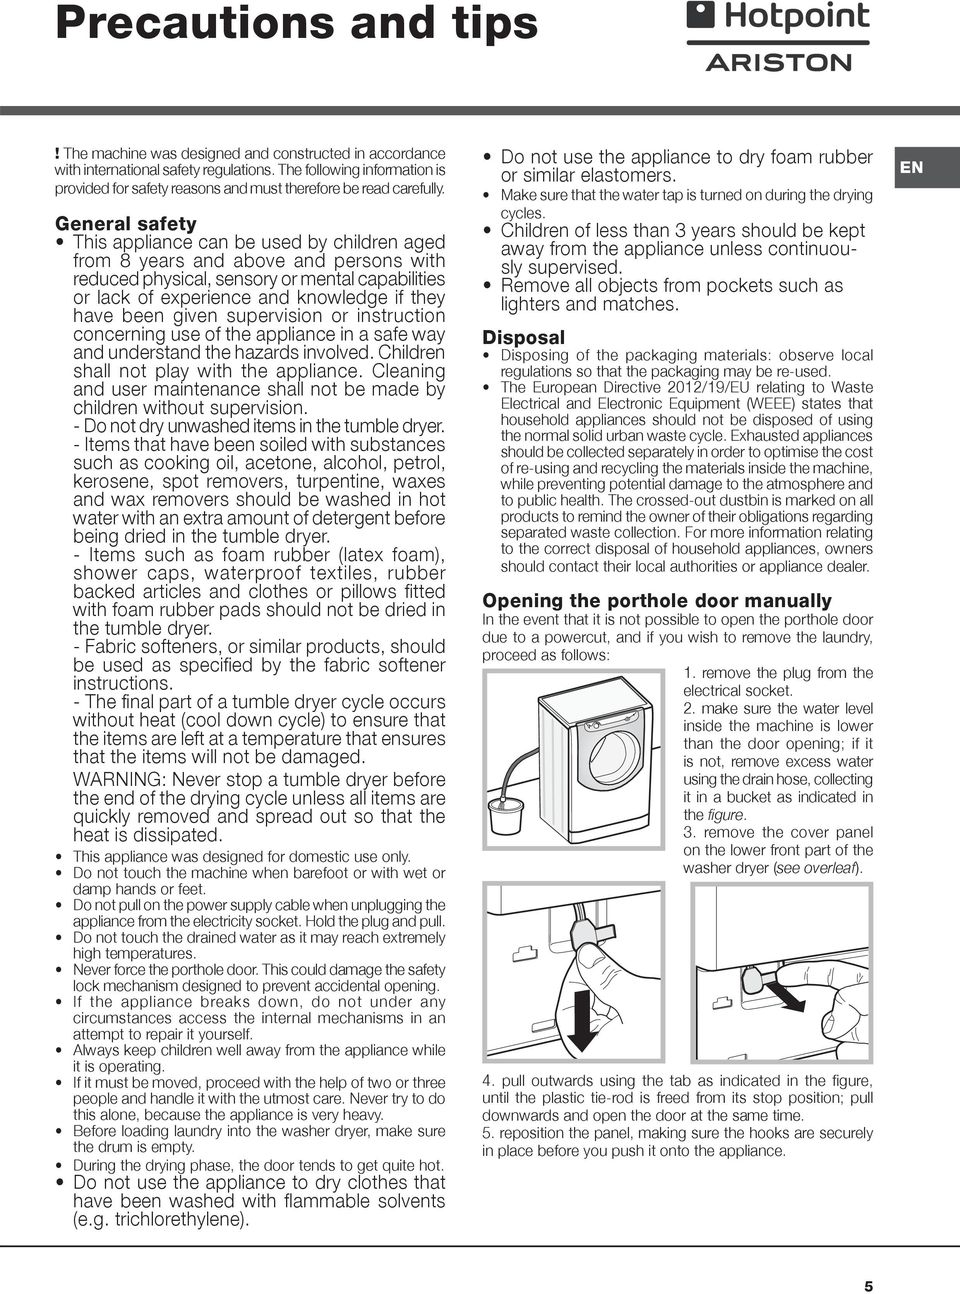 General safety This appliance can be used by children aged from 8 years and above and persons with reduced physical, sensory or mental capabilities or lack of experience and knowledge if they have